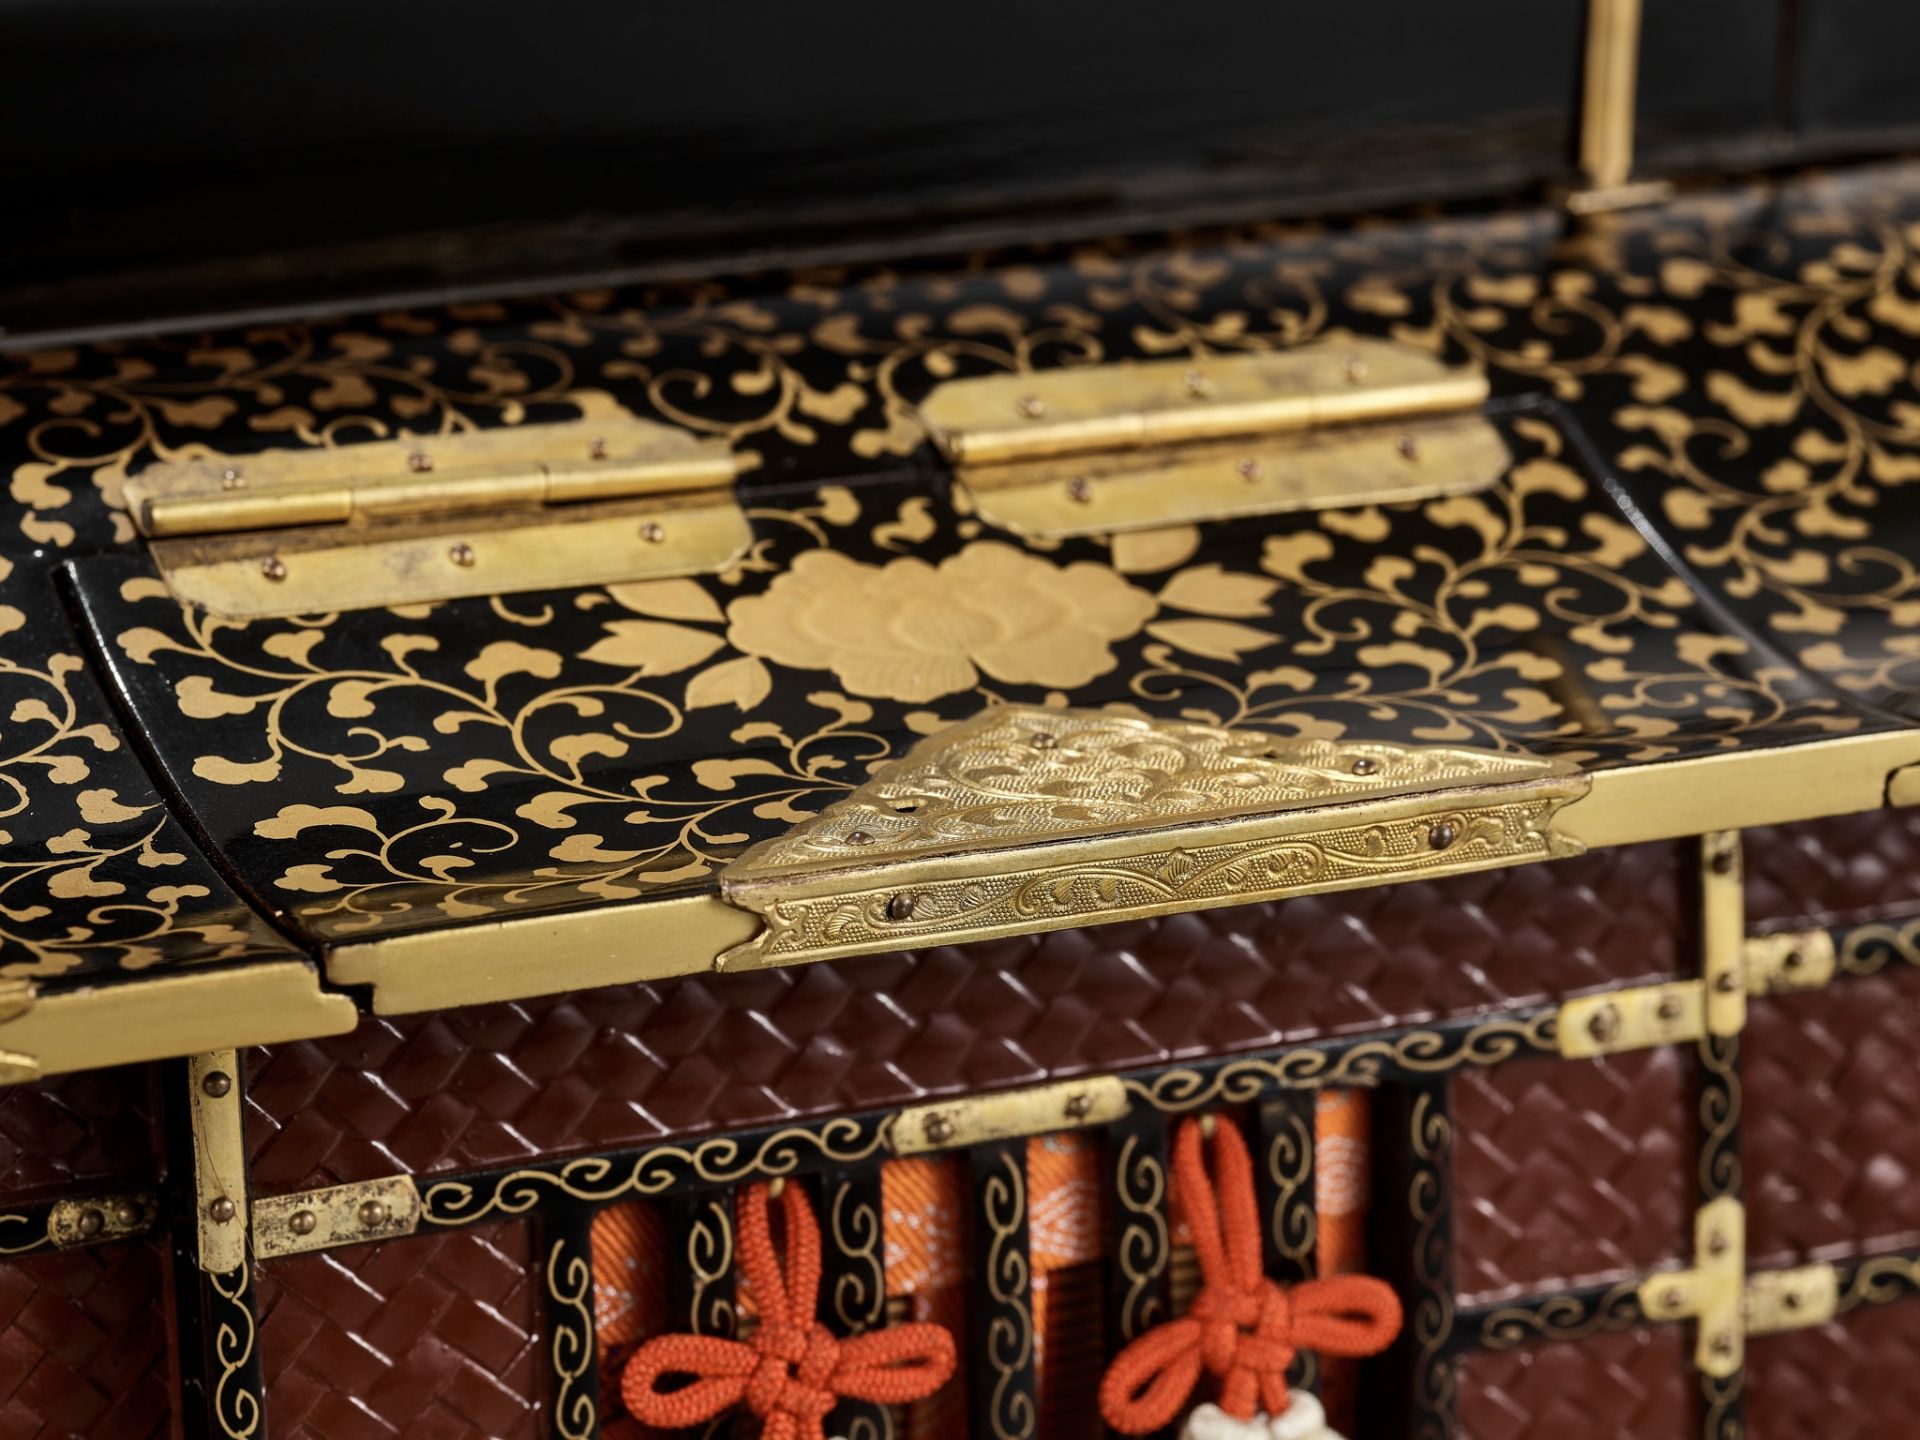 A LACQUER MINIATURE KAGO (PALANQUIN) - Image 2 of 14